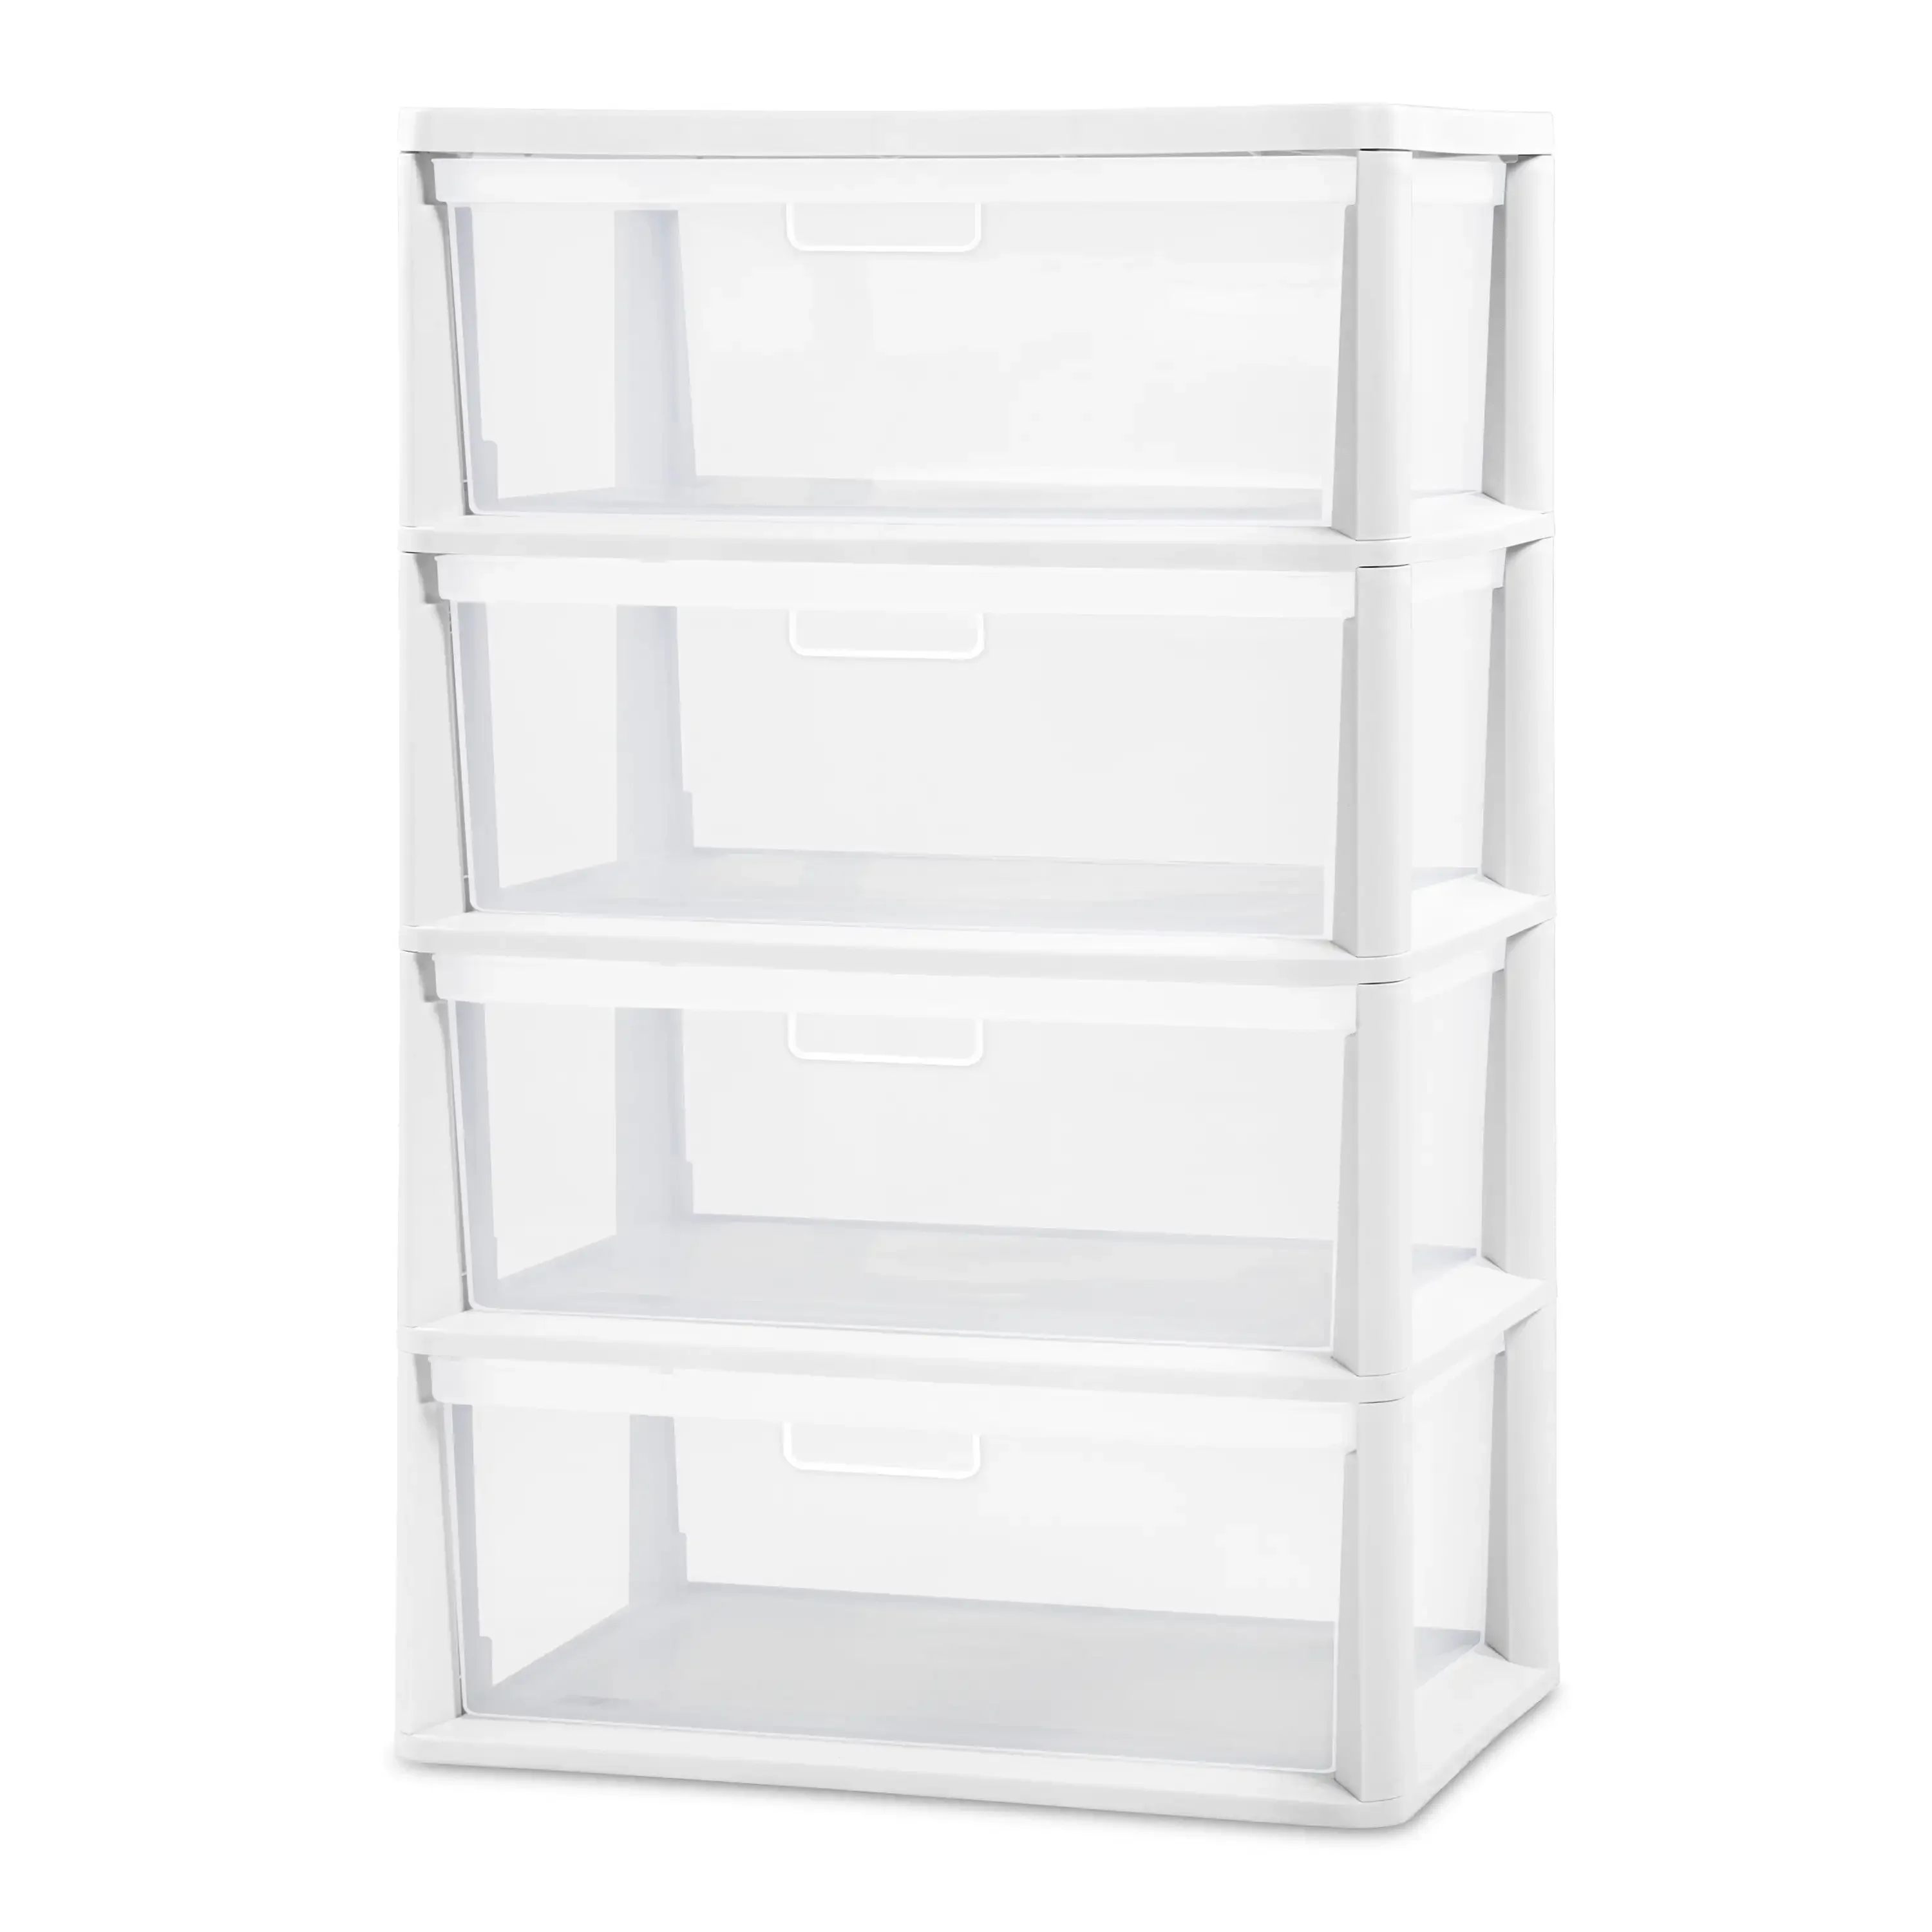 Sterilite 17918004 3 Drawer Unit, White Frame with Clear Drawers, Pack of 4  - AliExpress